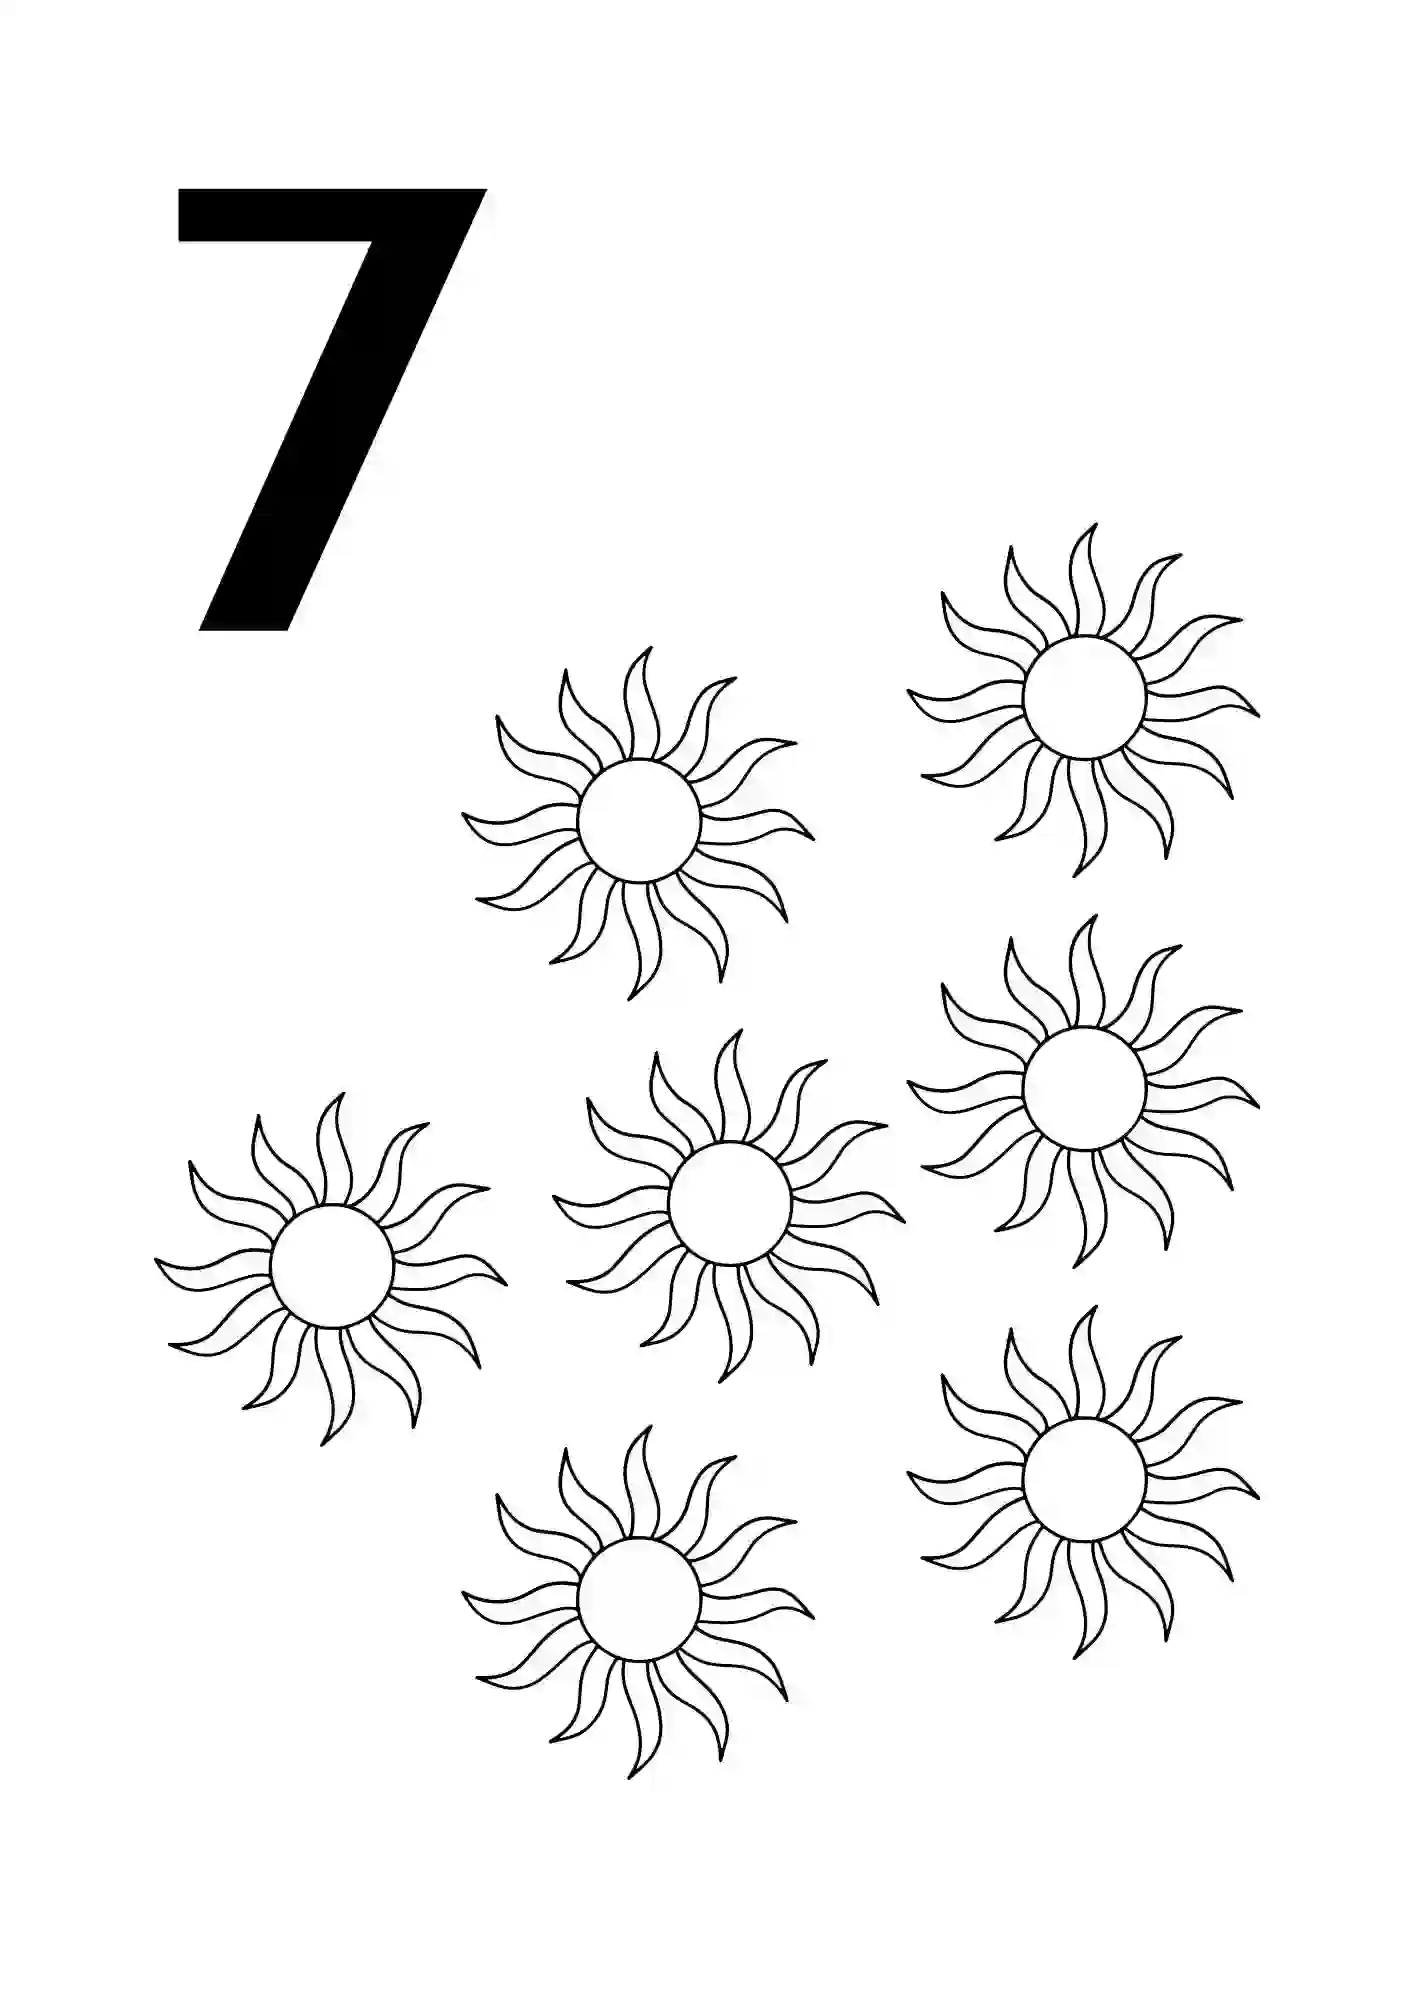 Count And Color Worksheets 1-10 (NUMBER 7)